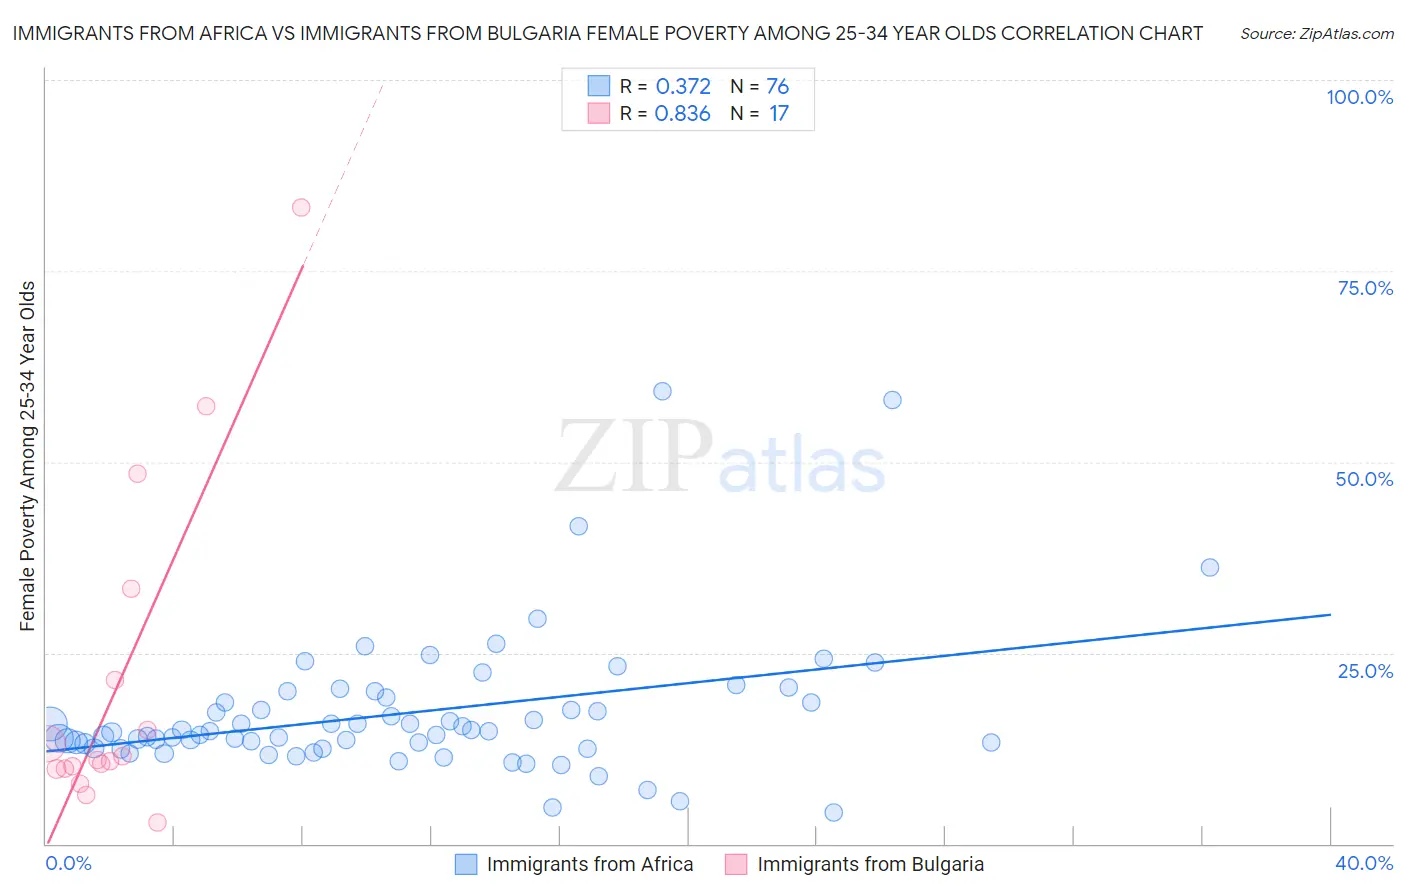 Immigrants from Africa vs Immigrants from Bulgaria Female Poverty Among 25-34 Year Olds